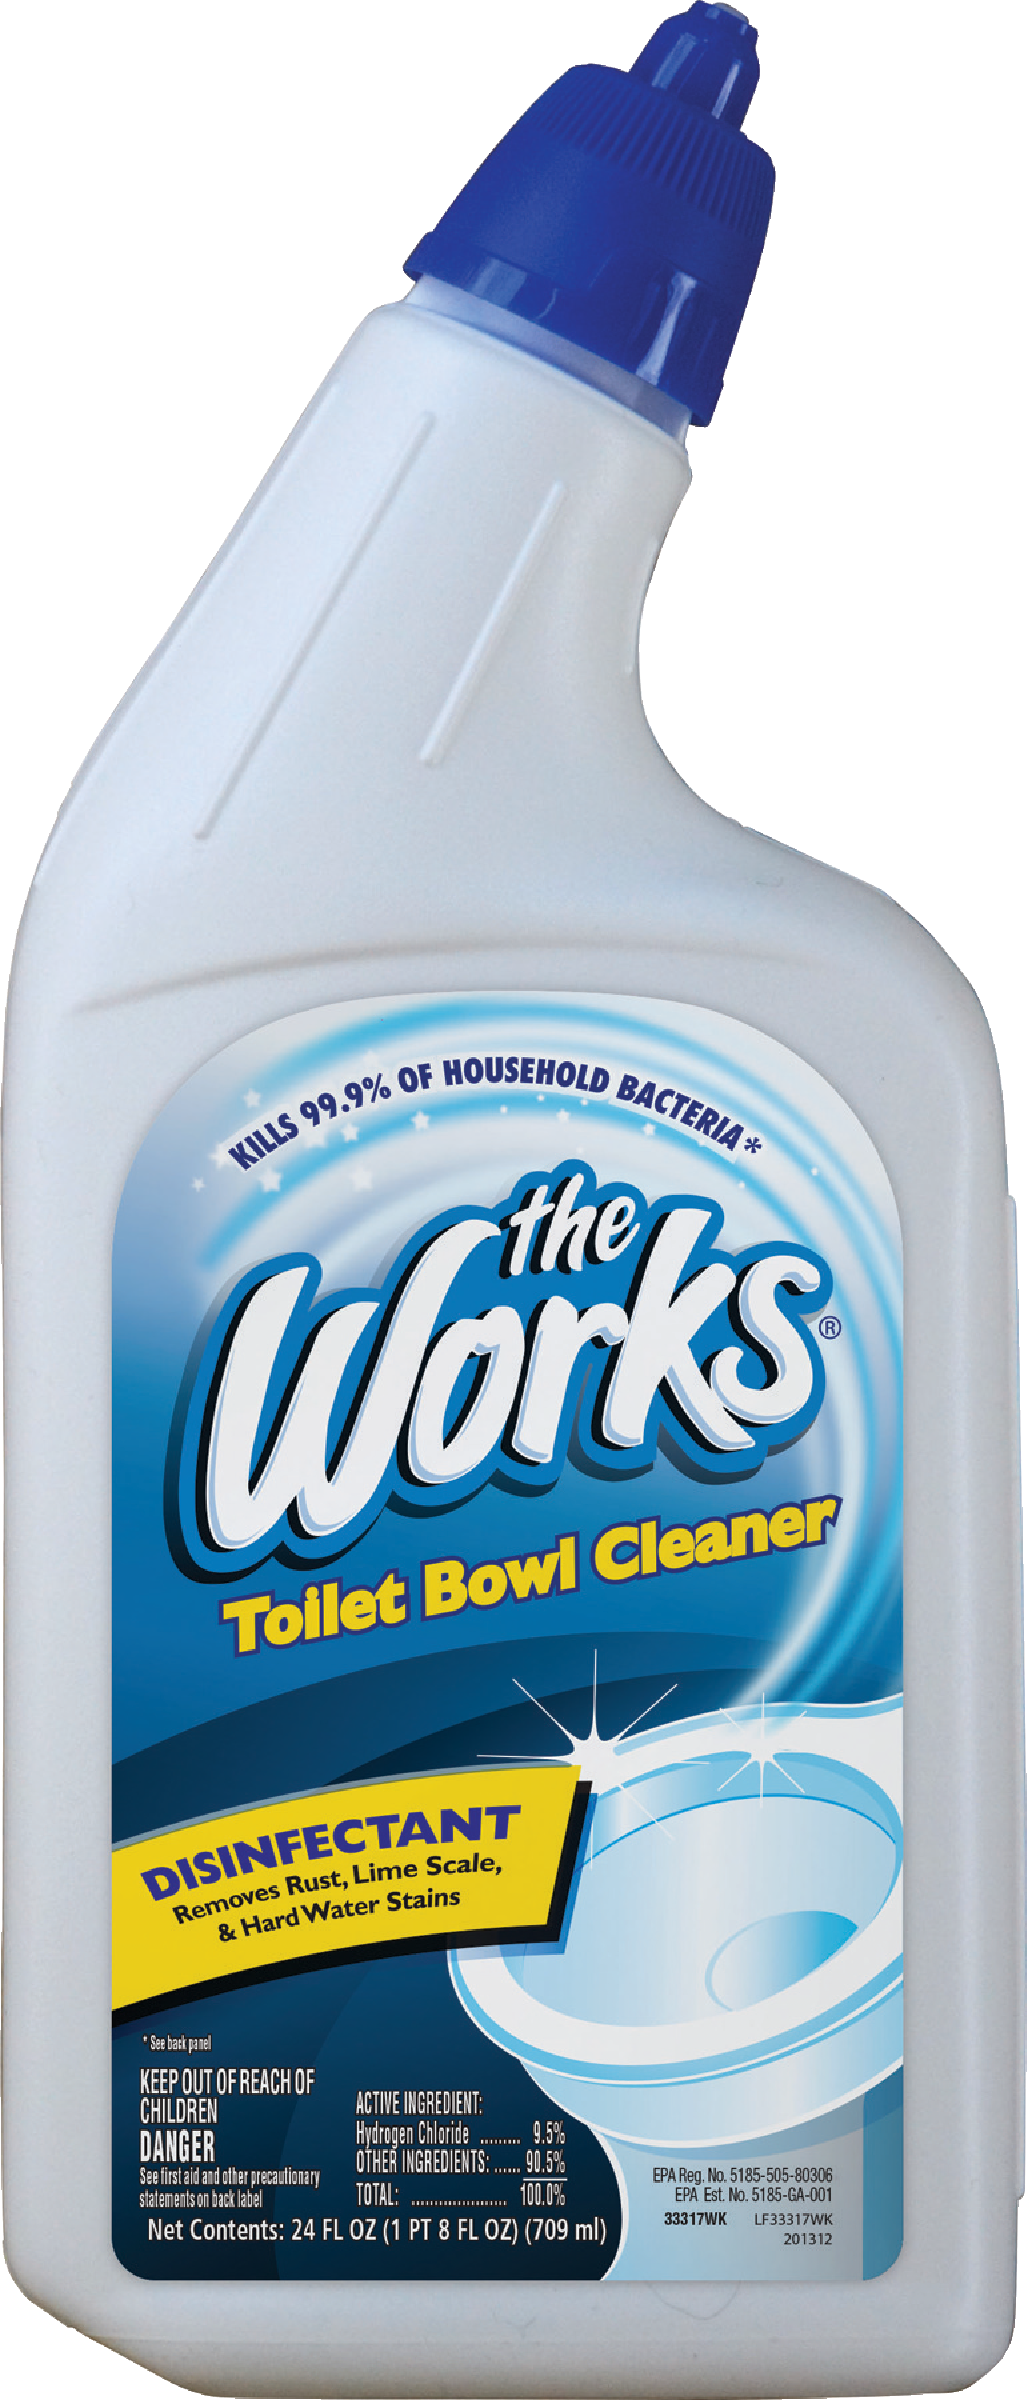 toilet bowl cleaners supply usa